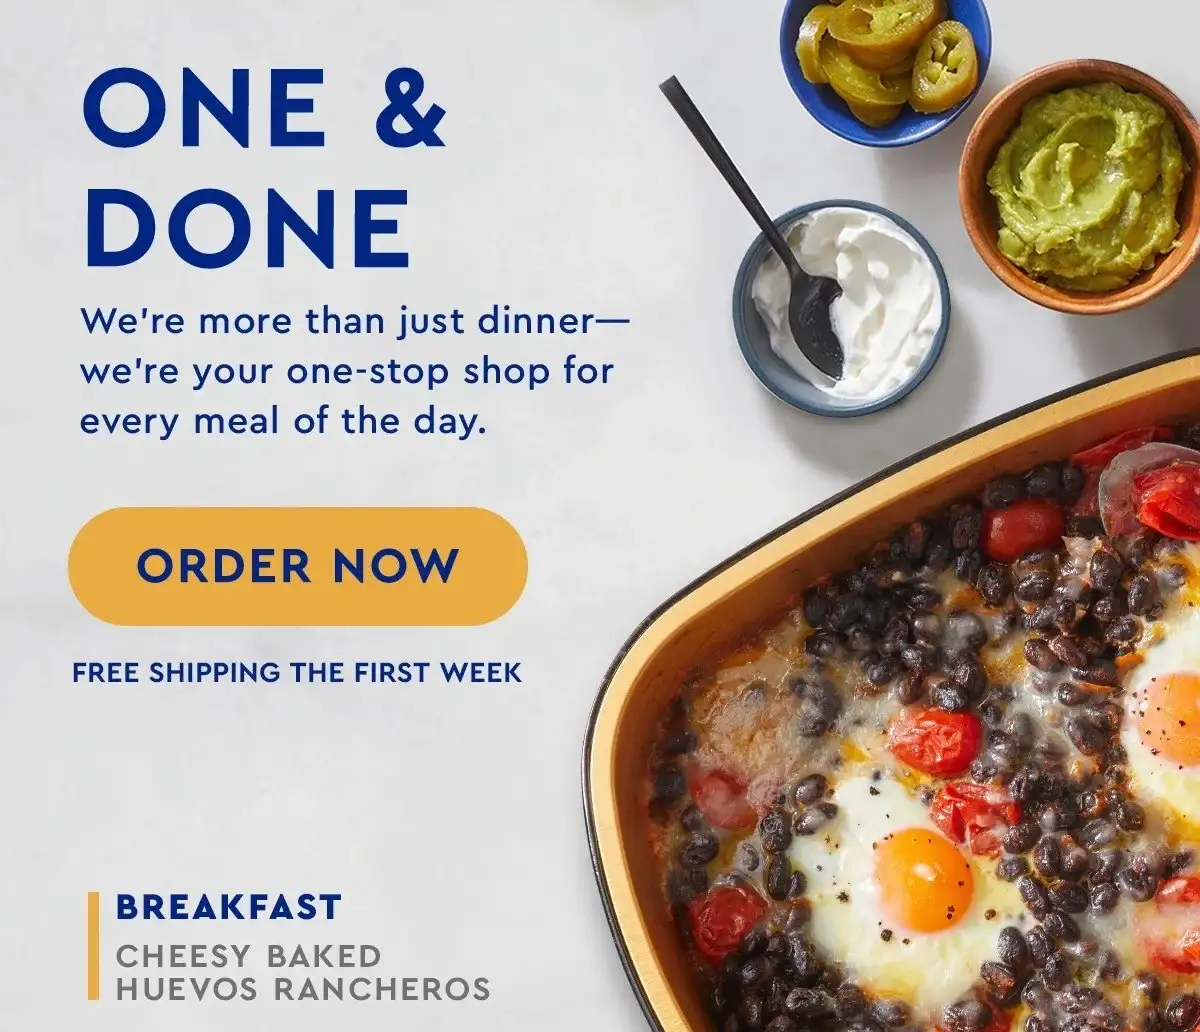 One & done | We’re more than just dinner—we’re your one-stop shop for every meal of the day. | ORDER NOW | FREE SHIPPING THE FIRST WEEK | BREAKFAST: CHEESY BAKED HUEVOS RANCHEROS